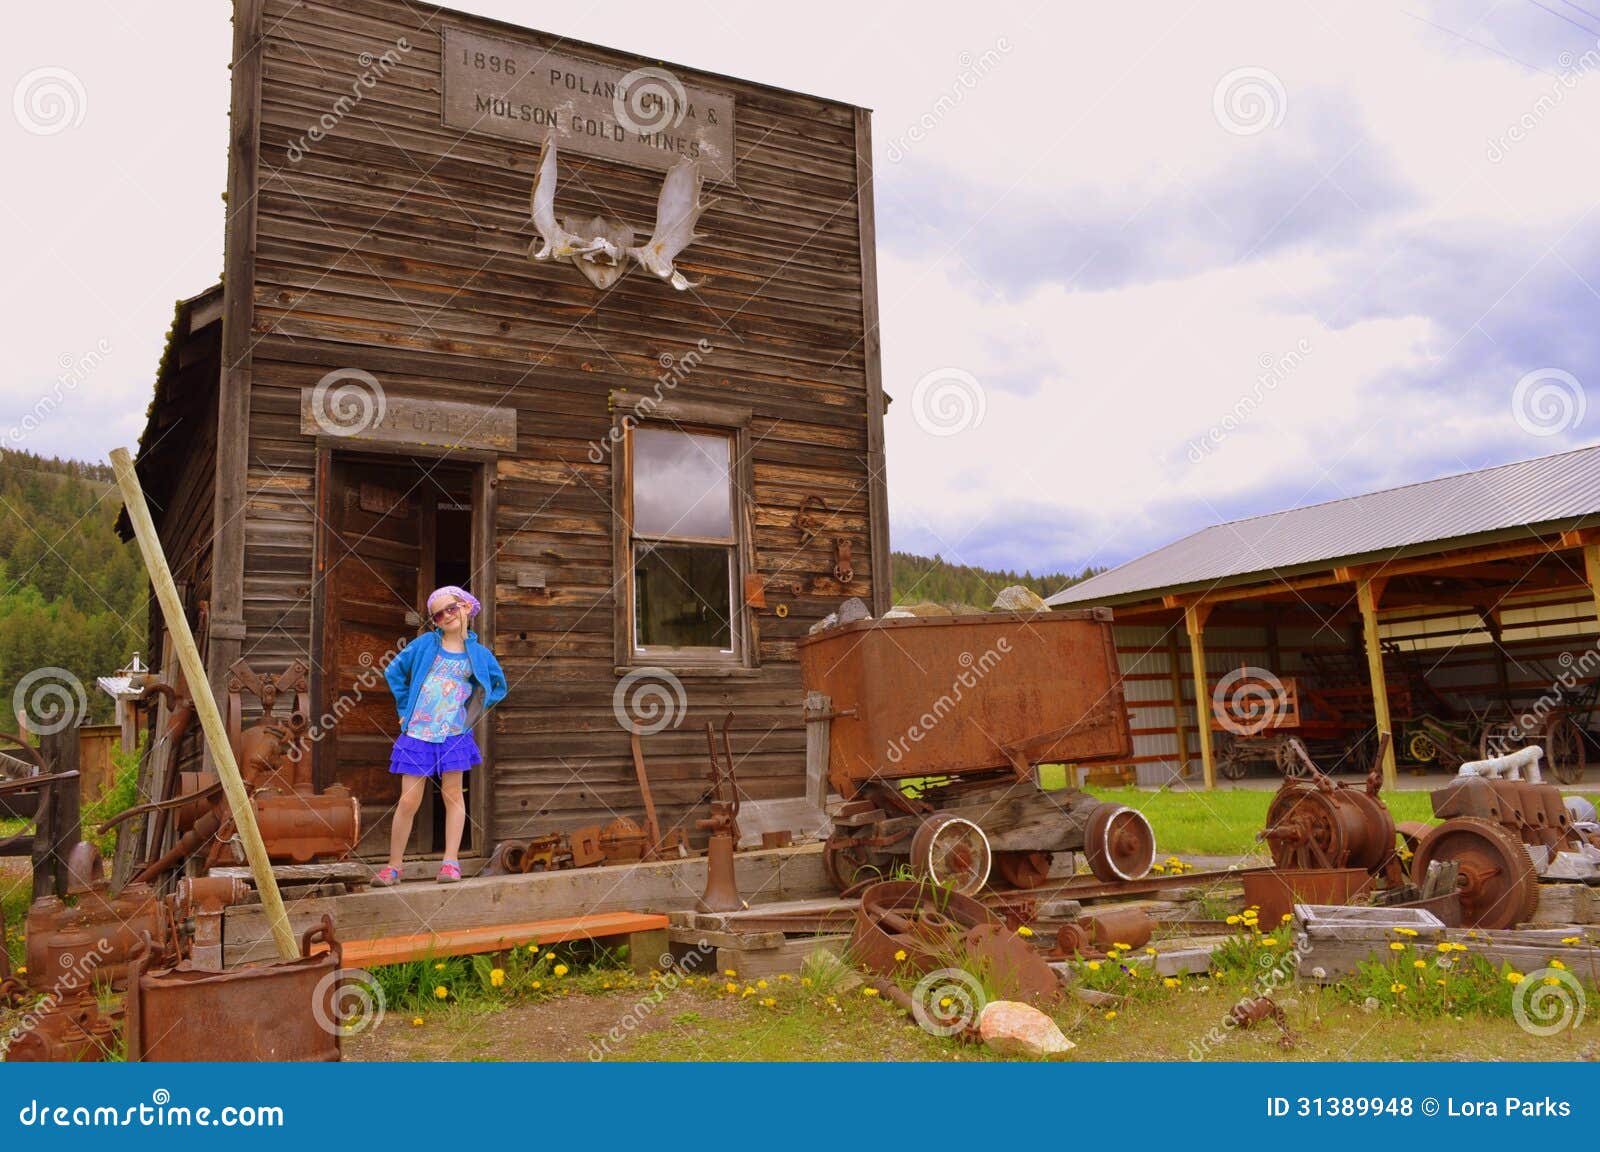 Molson Gold Mine Ghost Town Royalty Free Stock Photos ...